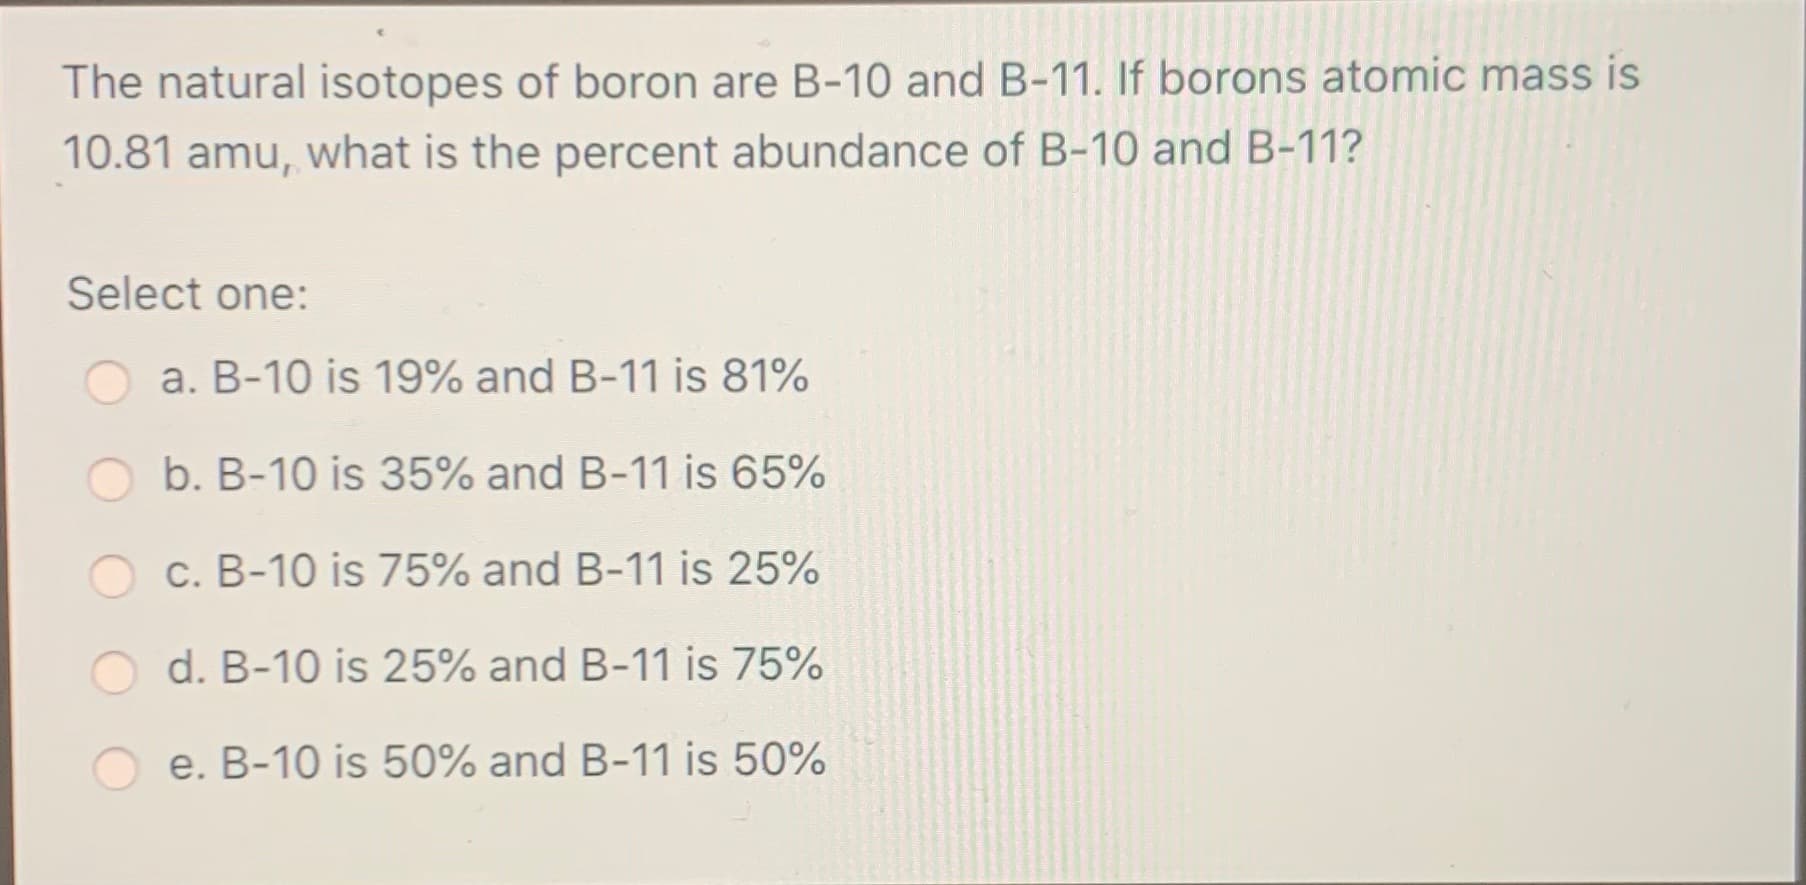 The natural isotopes of boron are B-10 and B-11. If borons atomic mass is
10.81 amu, what is the percent abundance of B-10 and B-11?
Select one:
a. B-10 is 19% and B-11 is 81%
b. B-10 is 35% and B-11 is 65%
c. B-10 is 75% and B-11 is 25%
d. B-10 is 25% and B-11 is 75%
